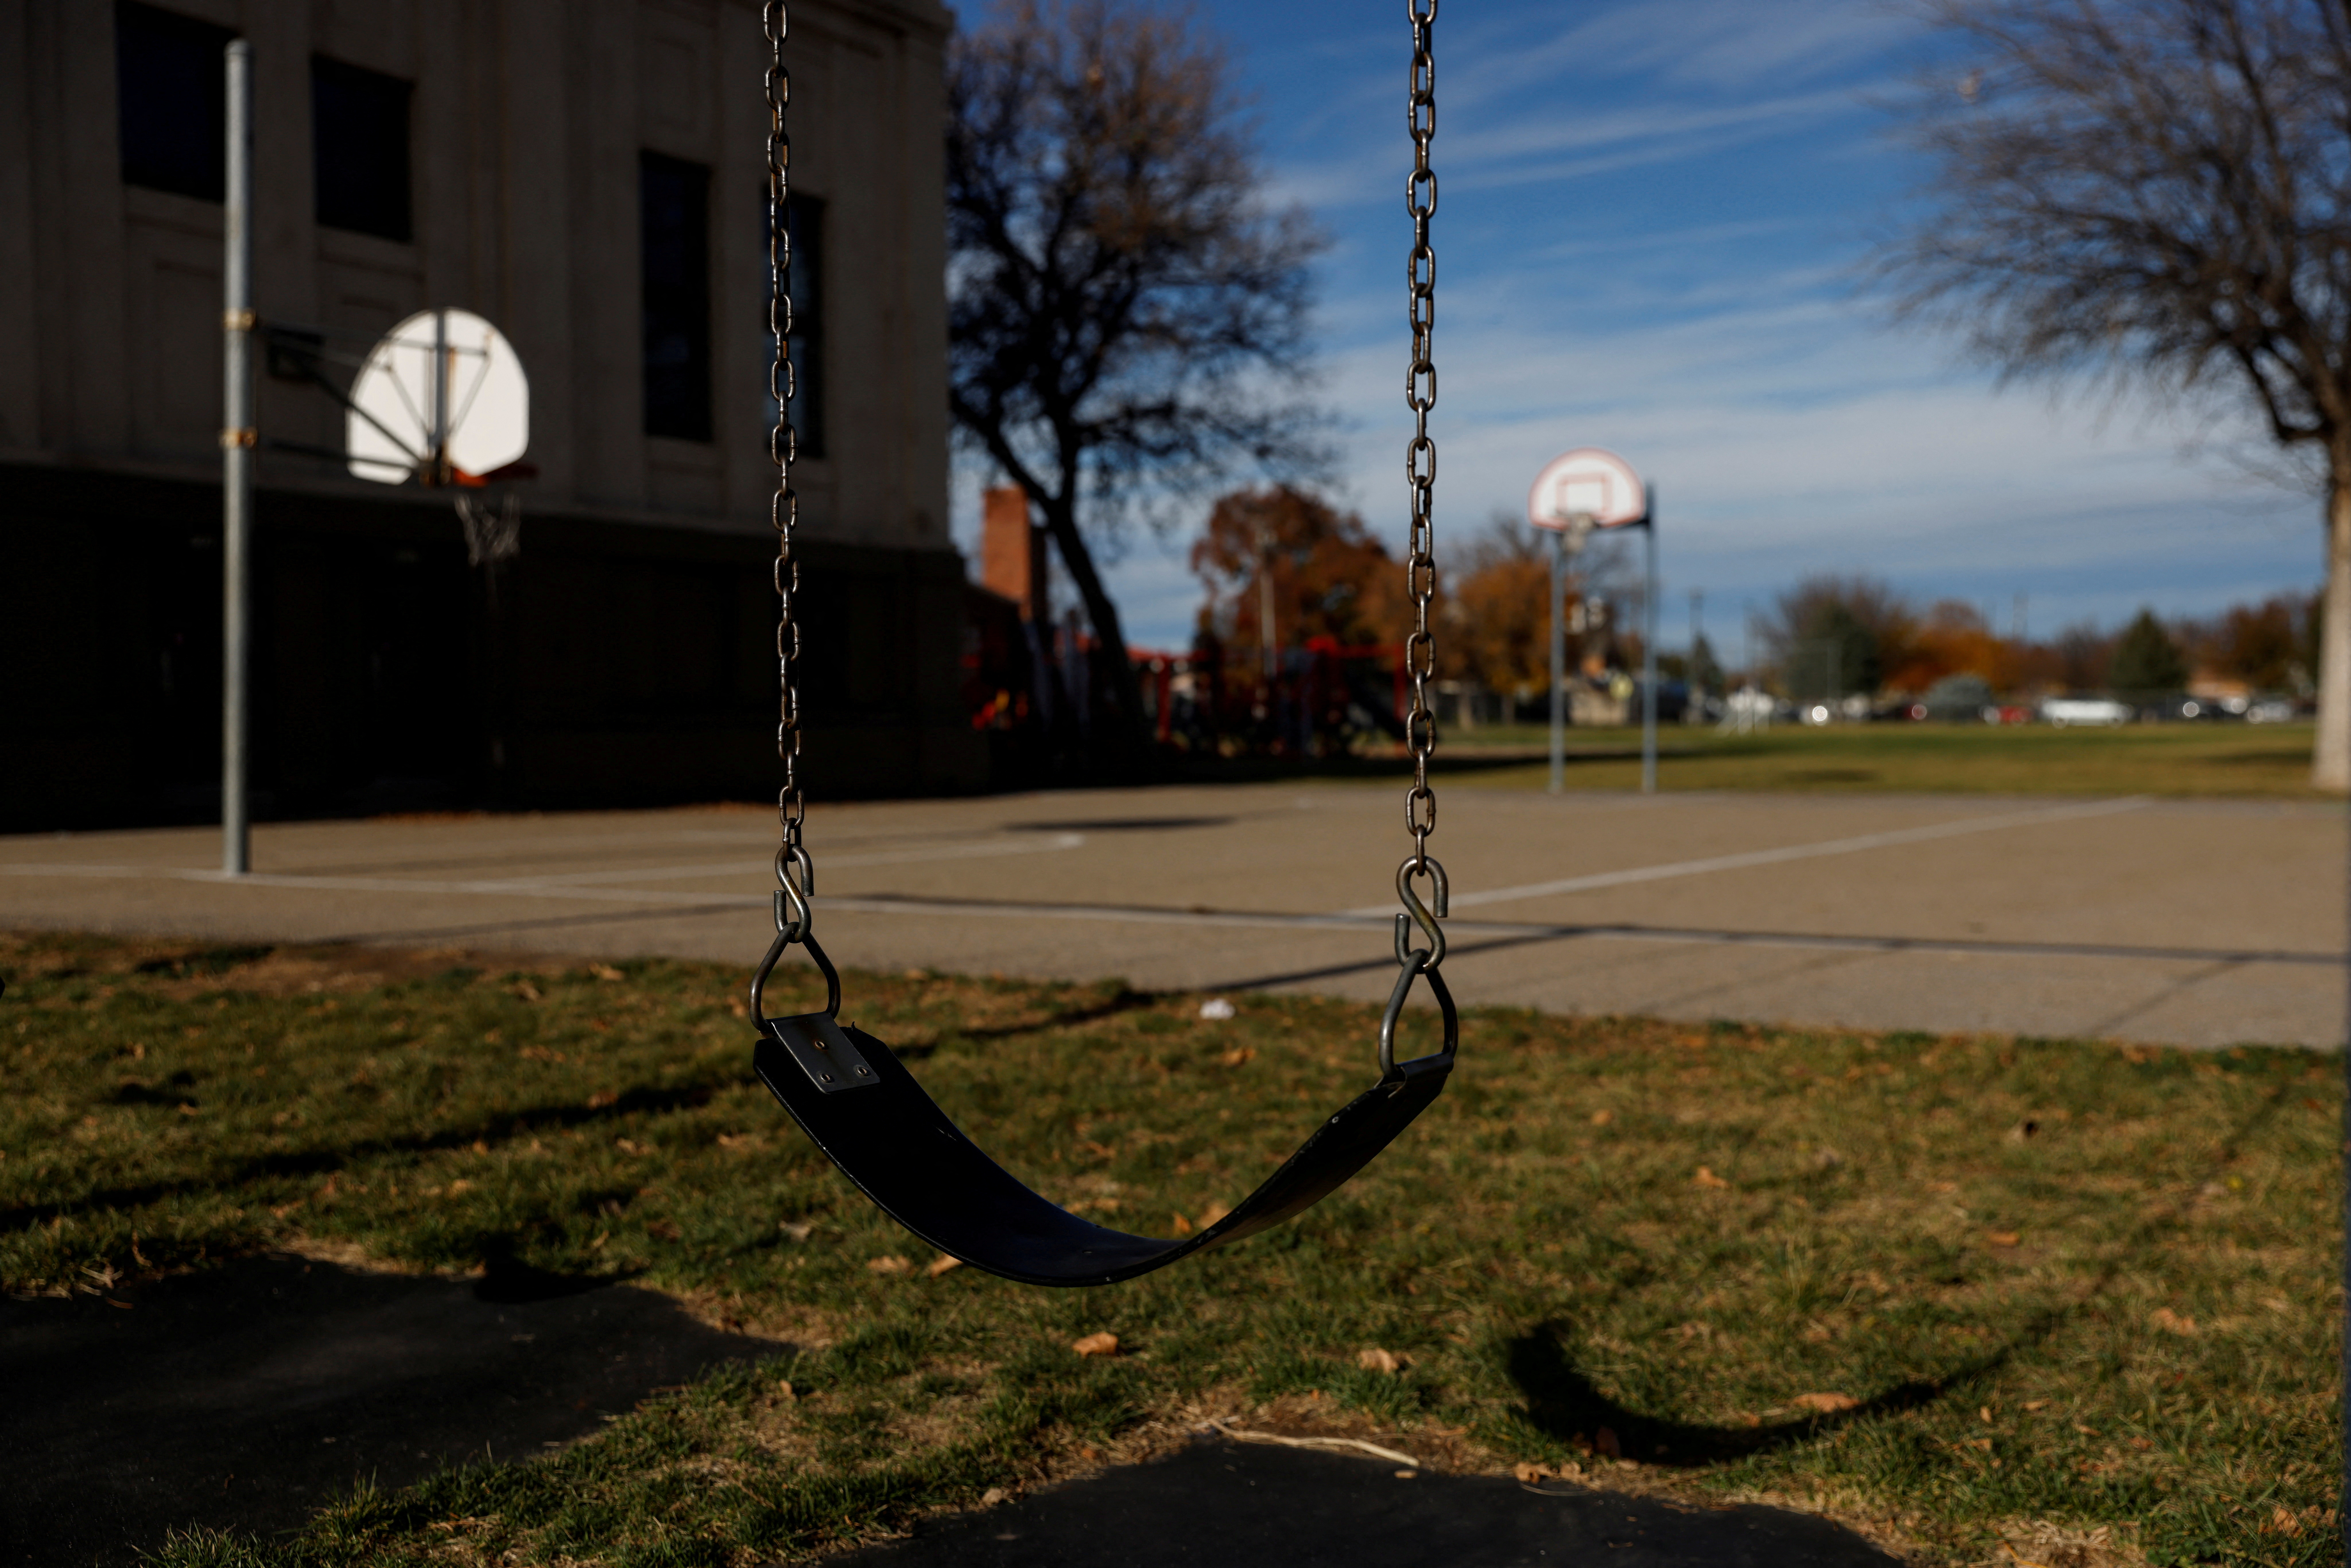 An empty swing hangs on a playground at a middle school in Nampa